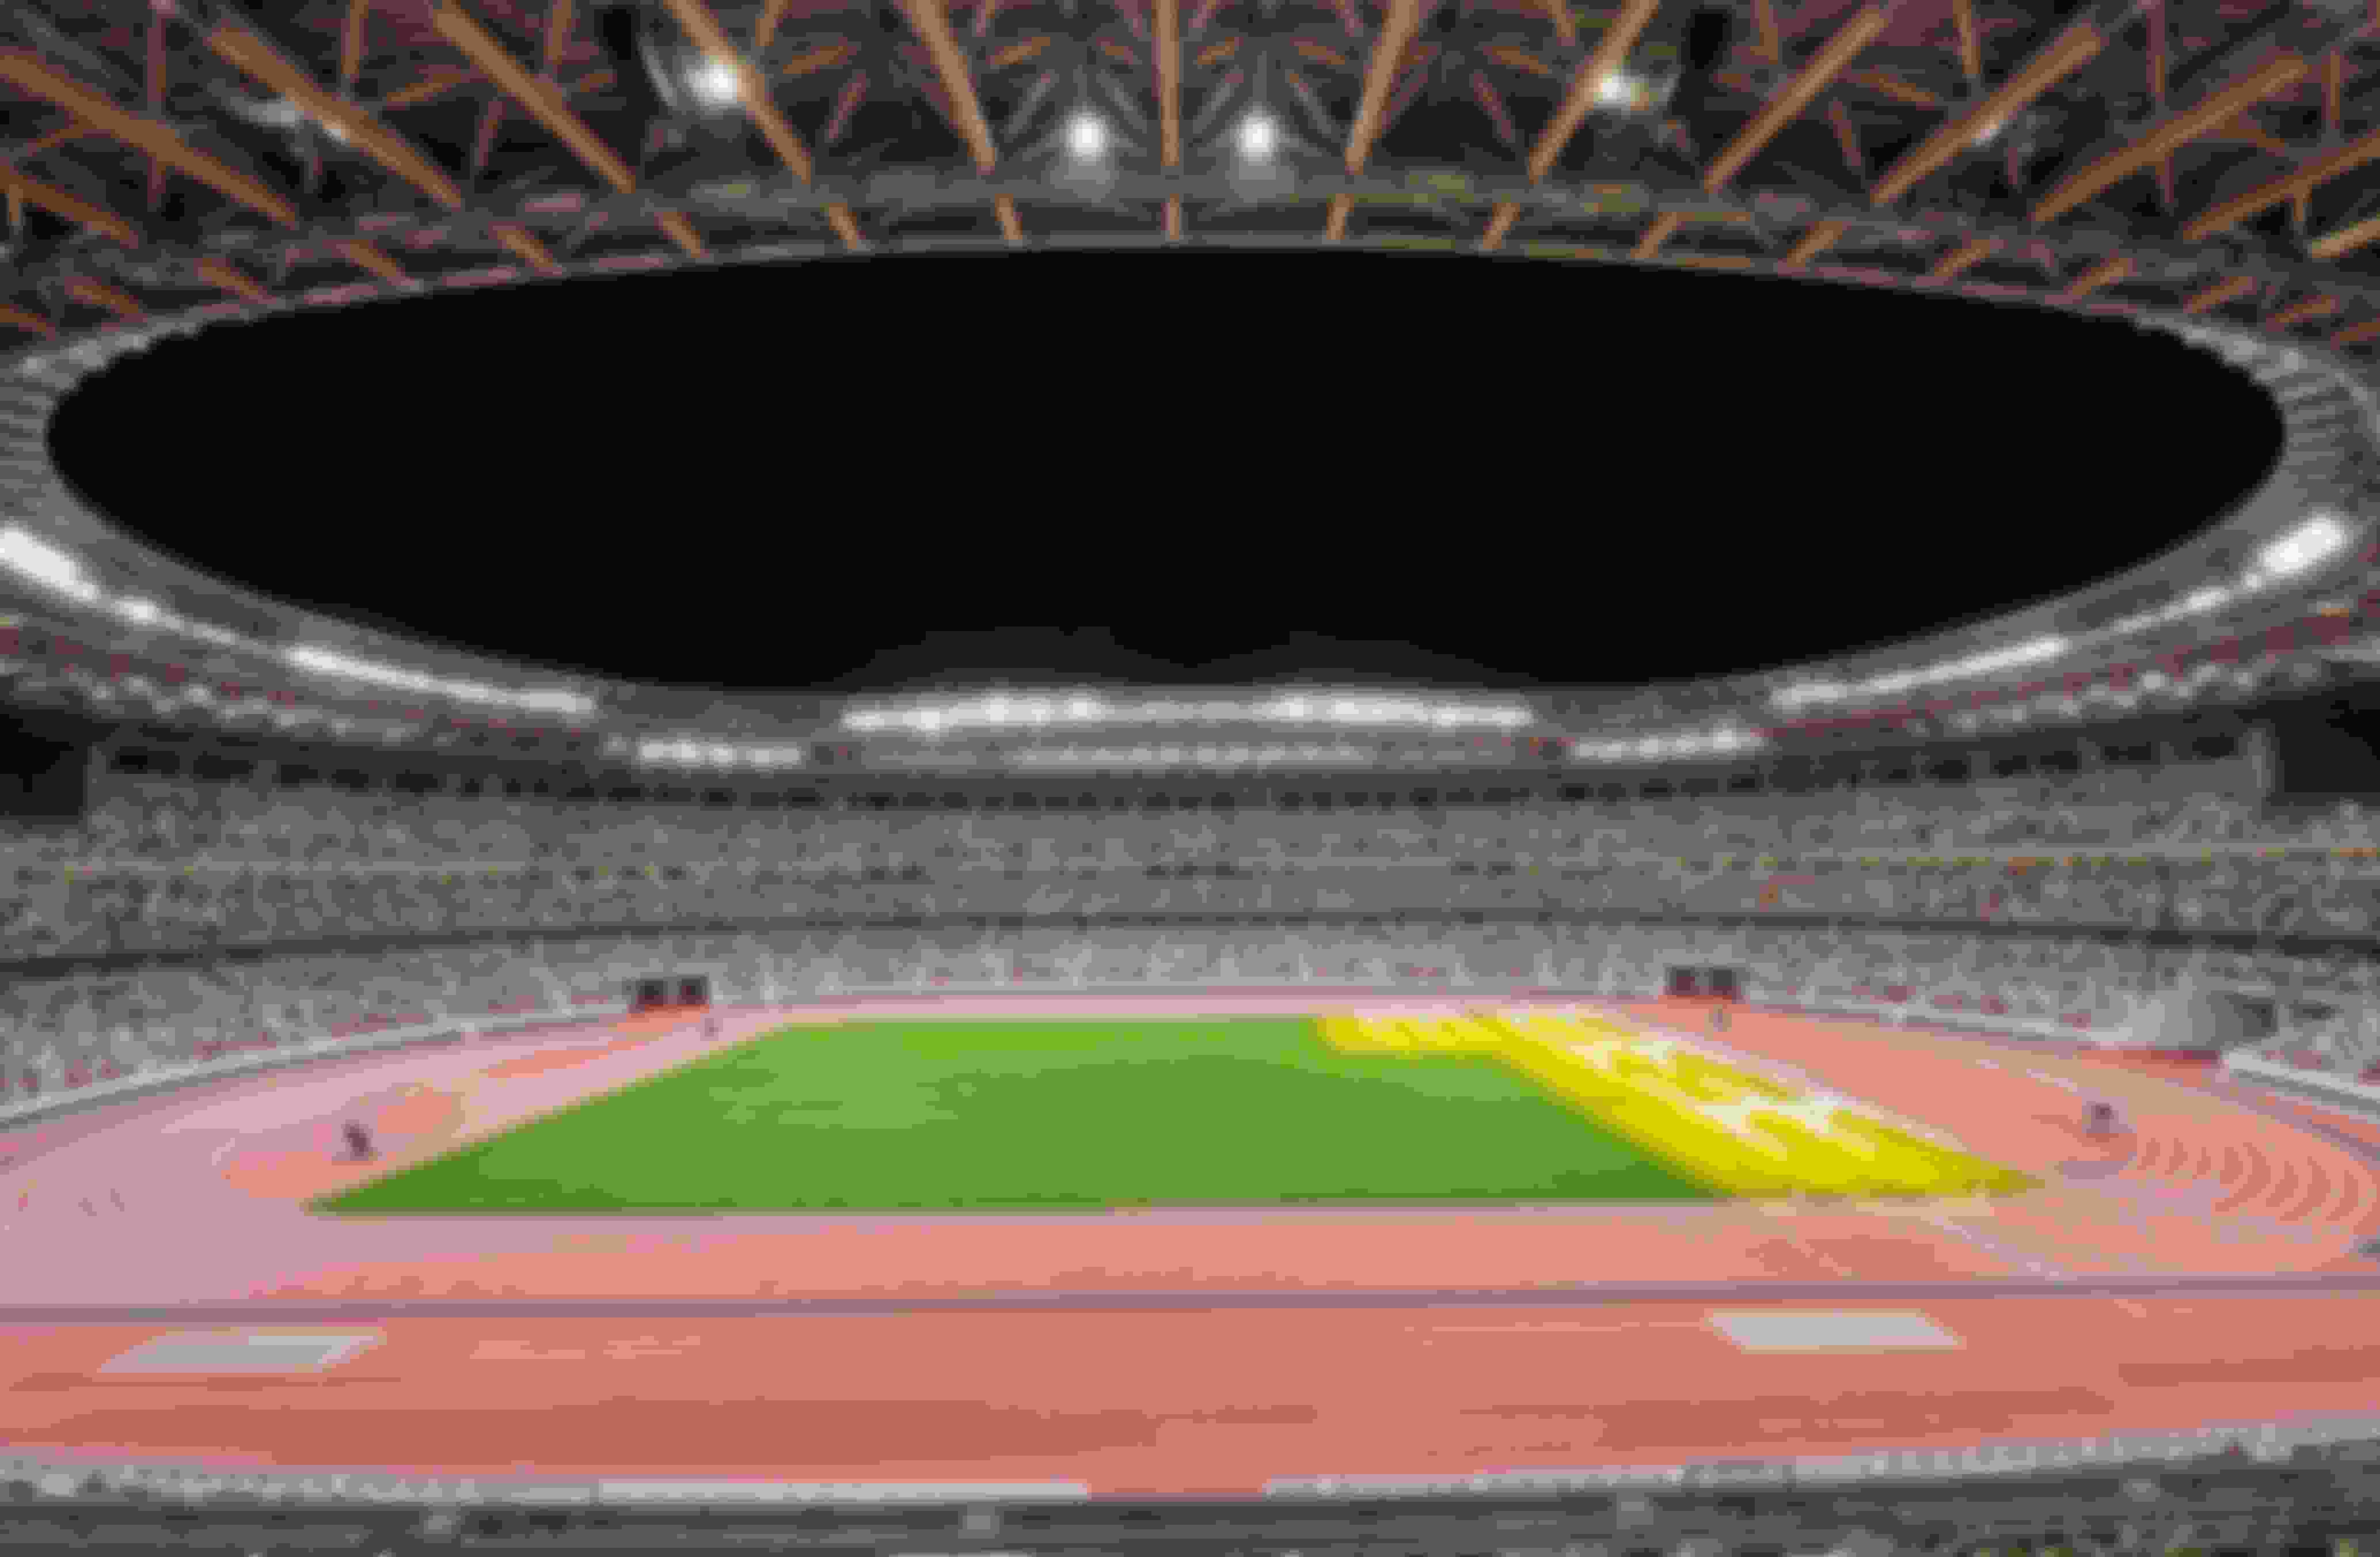 The National Stadium will open and close Tokyo 2020 